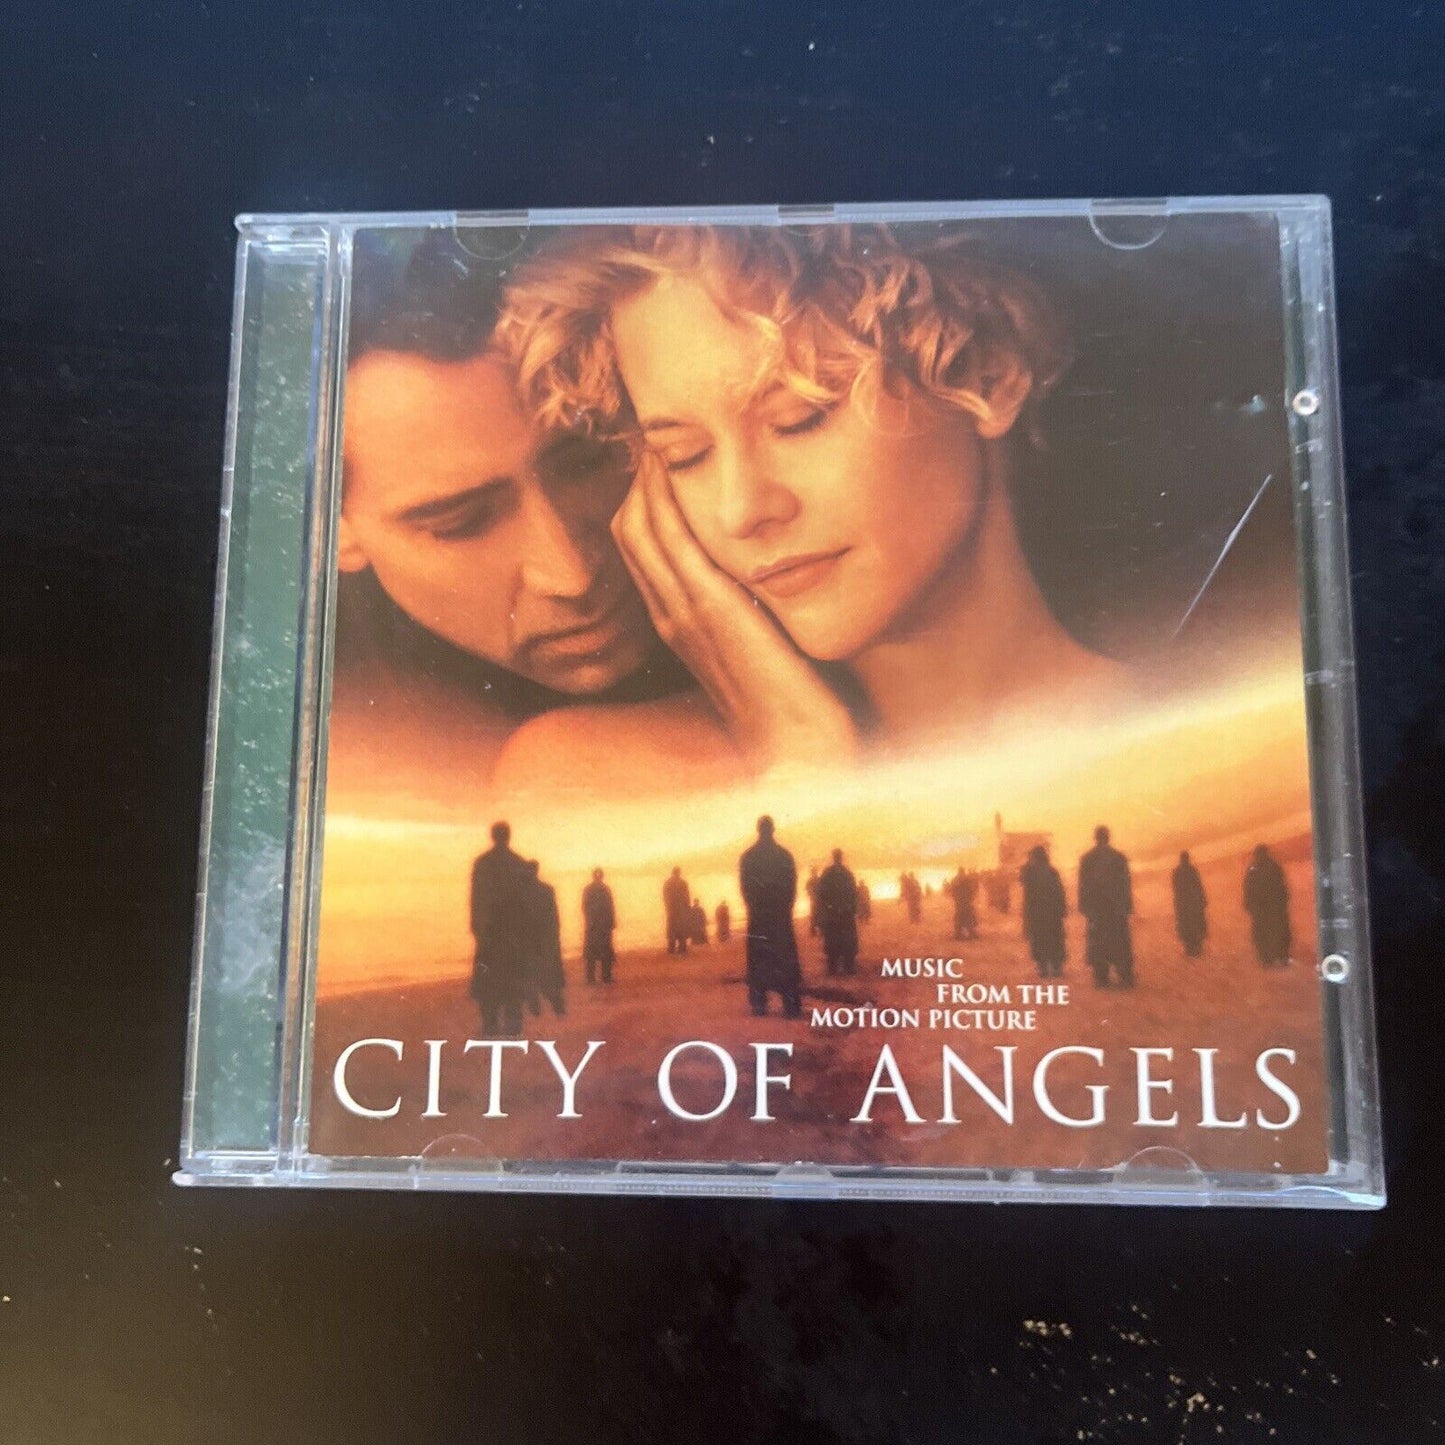 City of Angels - Music From The Motion Picture (CD, 1998)